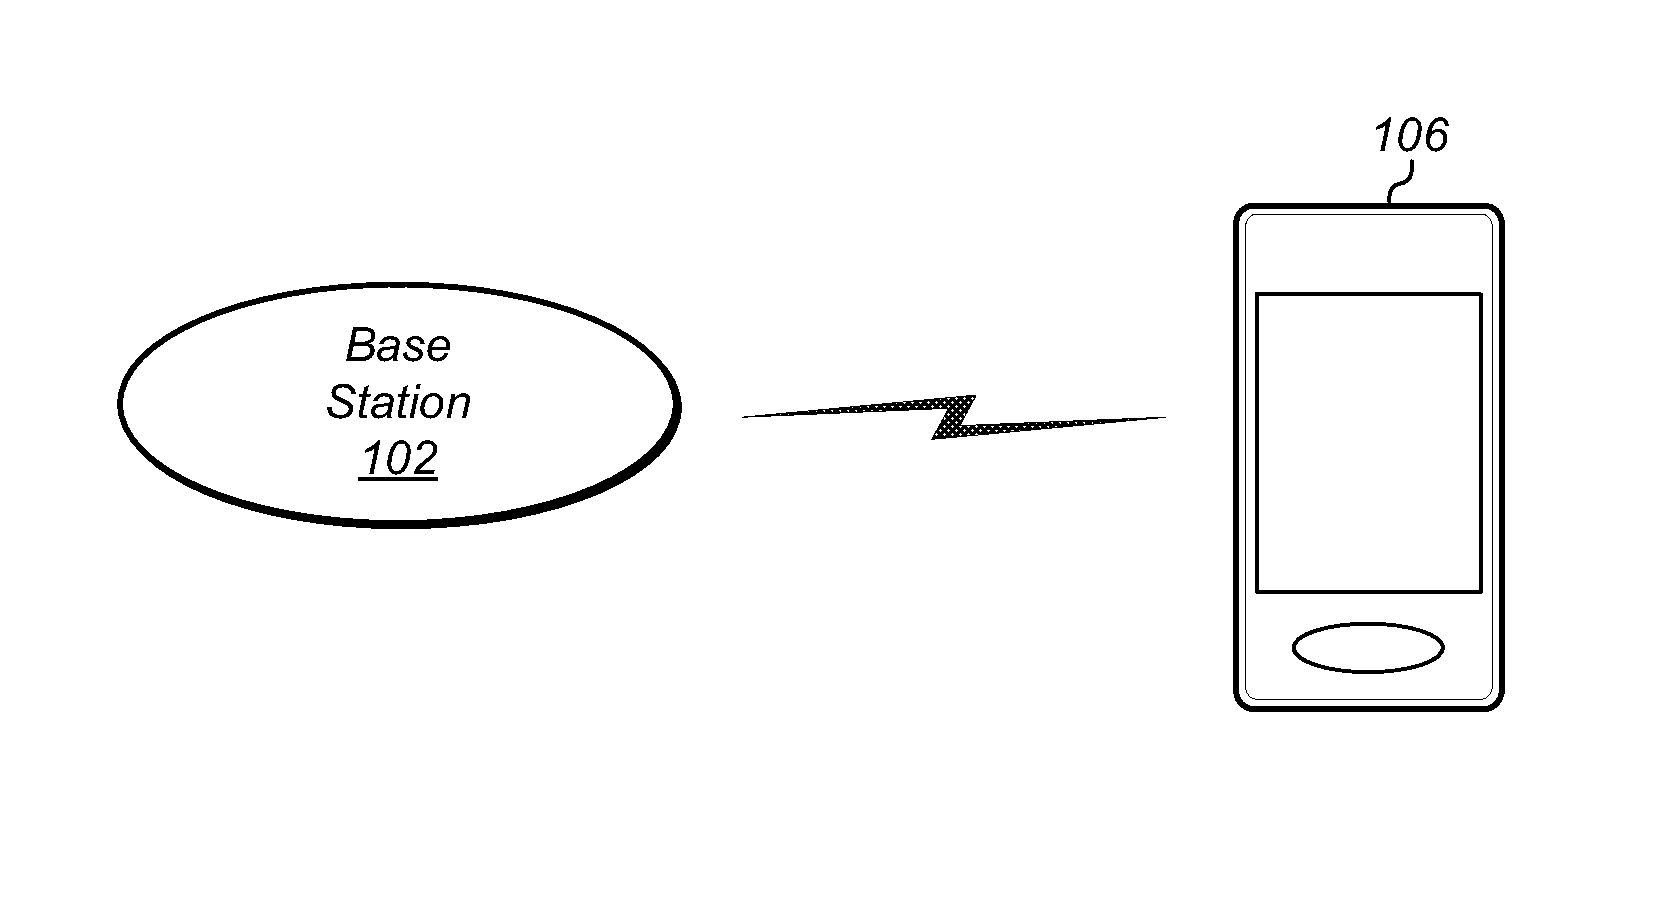 User Context Aware Throttling of Transition Attempts to Connected Mode